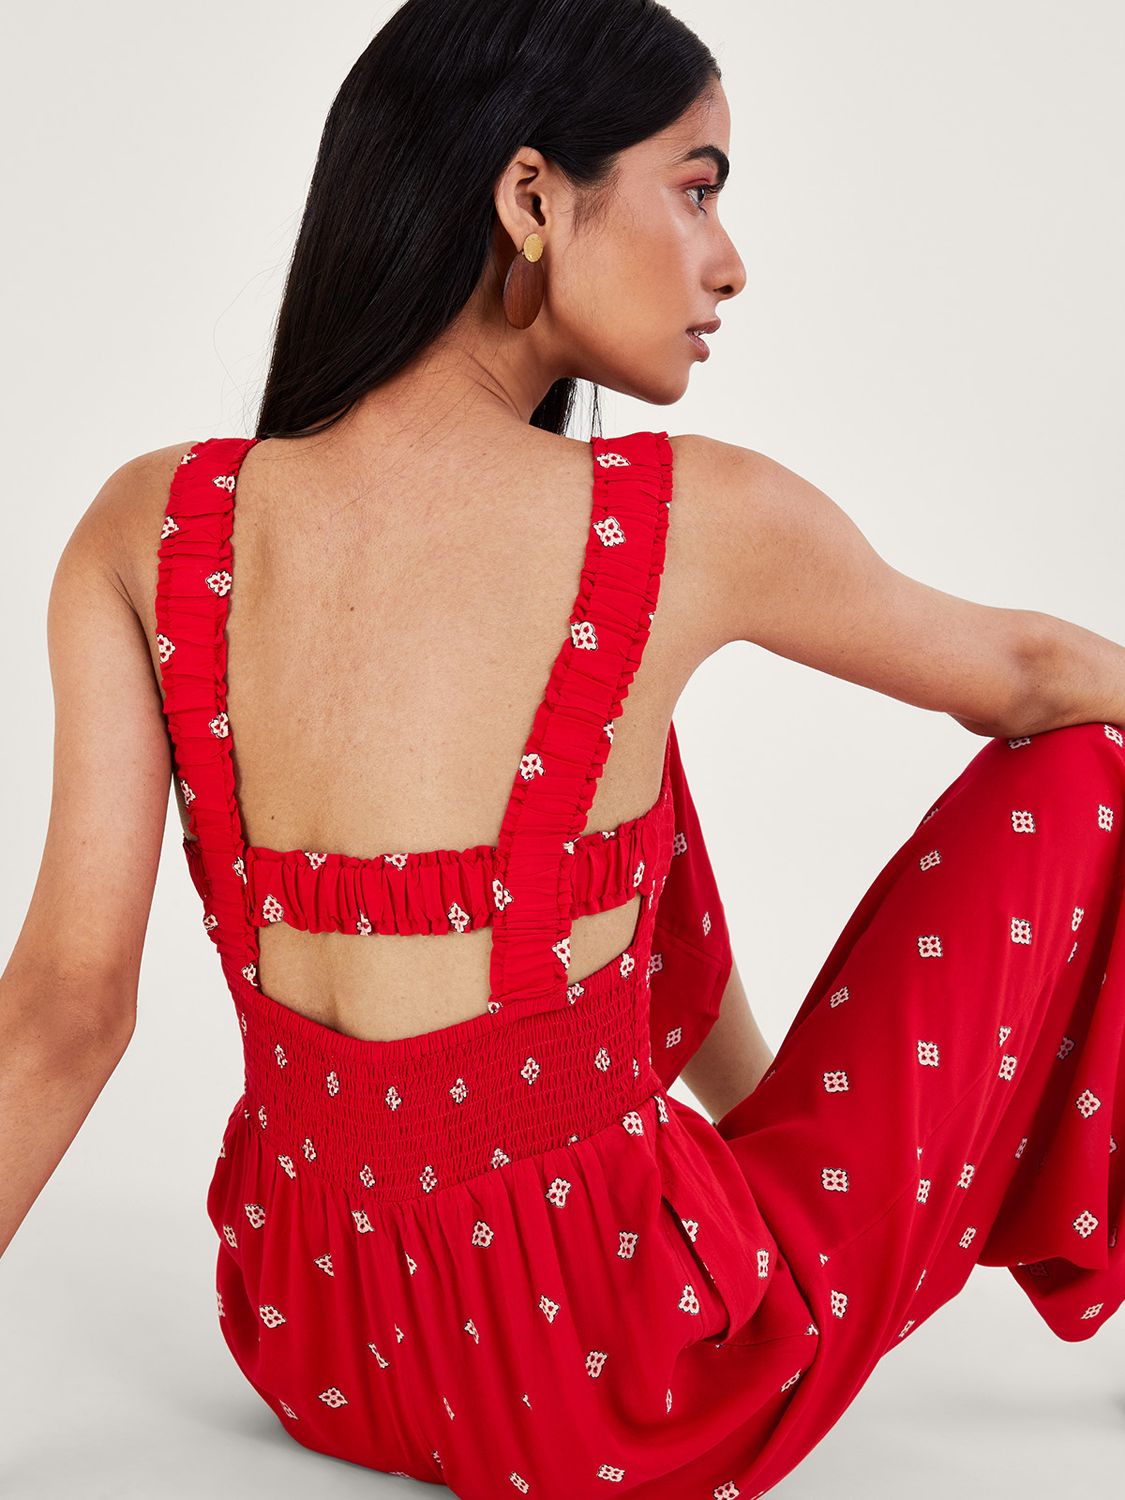 Monsoon Geometric Print Cut-Out Back Jumpsuit, Red, S